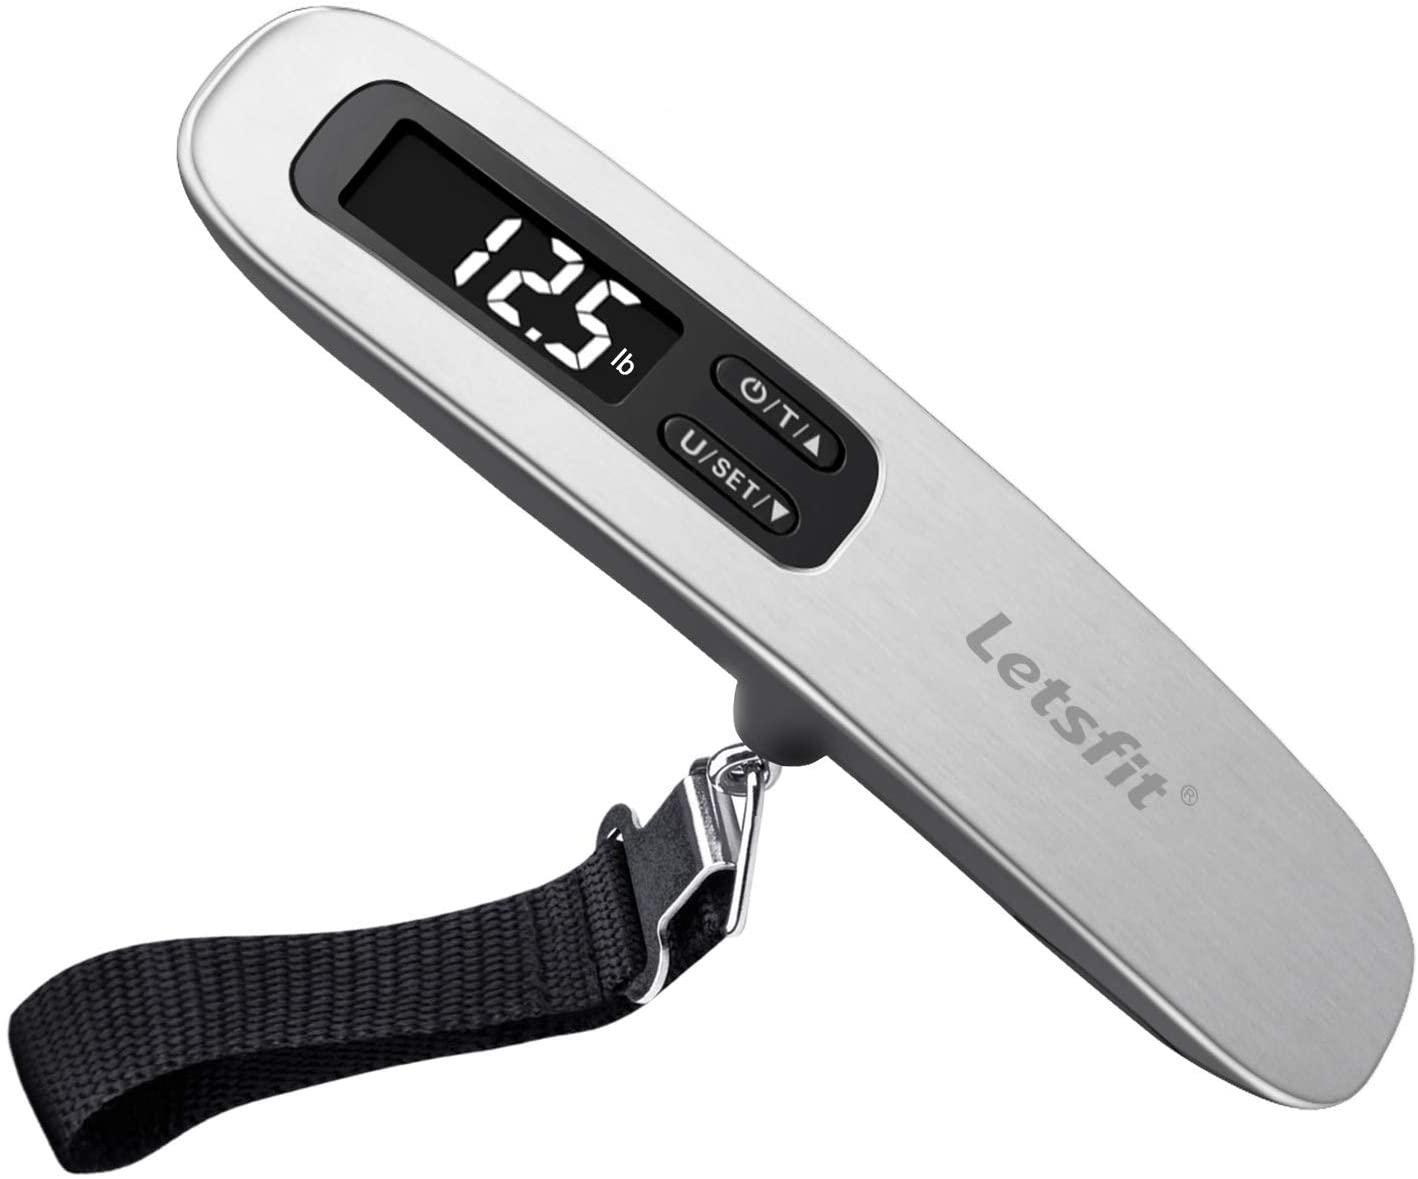 [US Direct] El910h Digital Luggage Scale 110-pound Hanging Luggage Scale With Backlit Lcd Display Portable Luggage Weighing With Hook silver